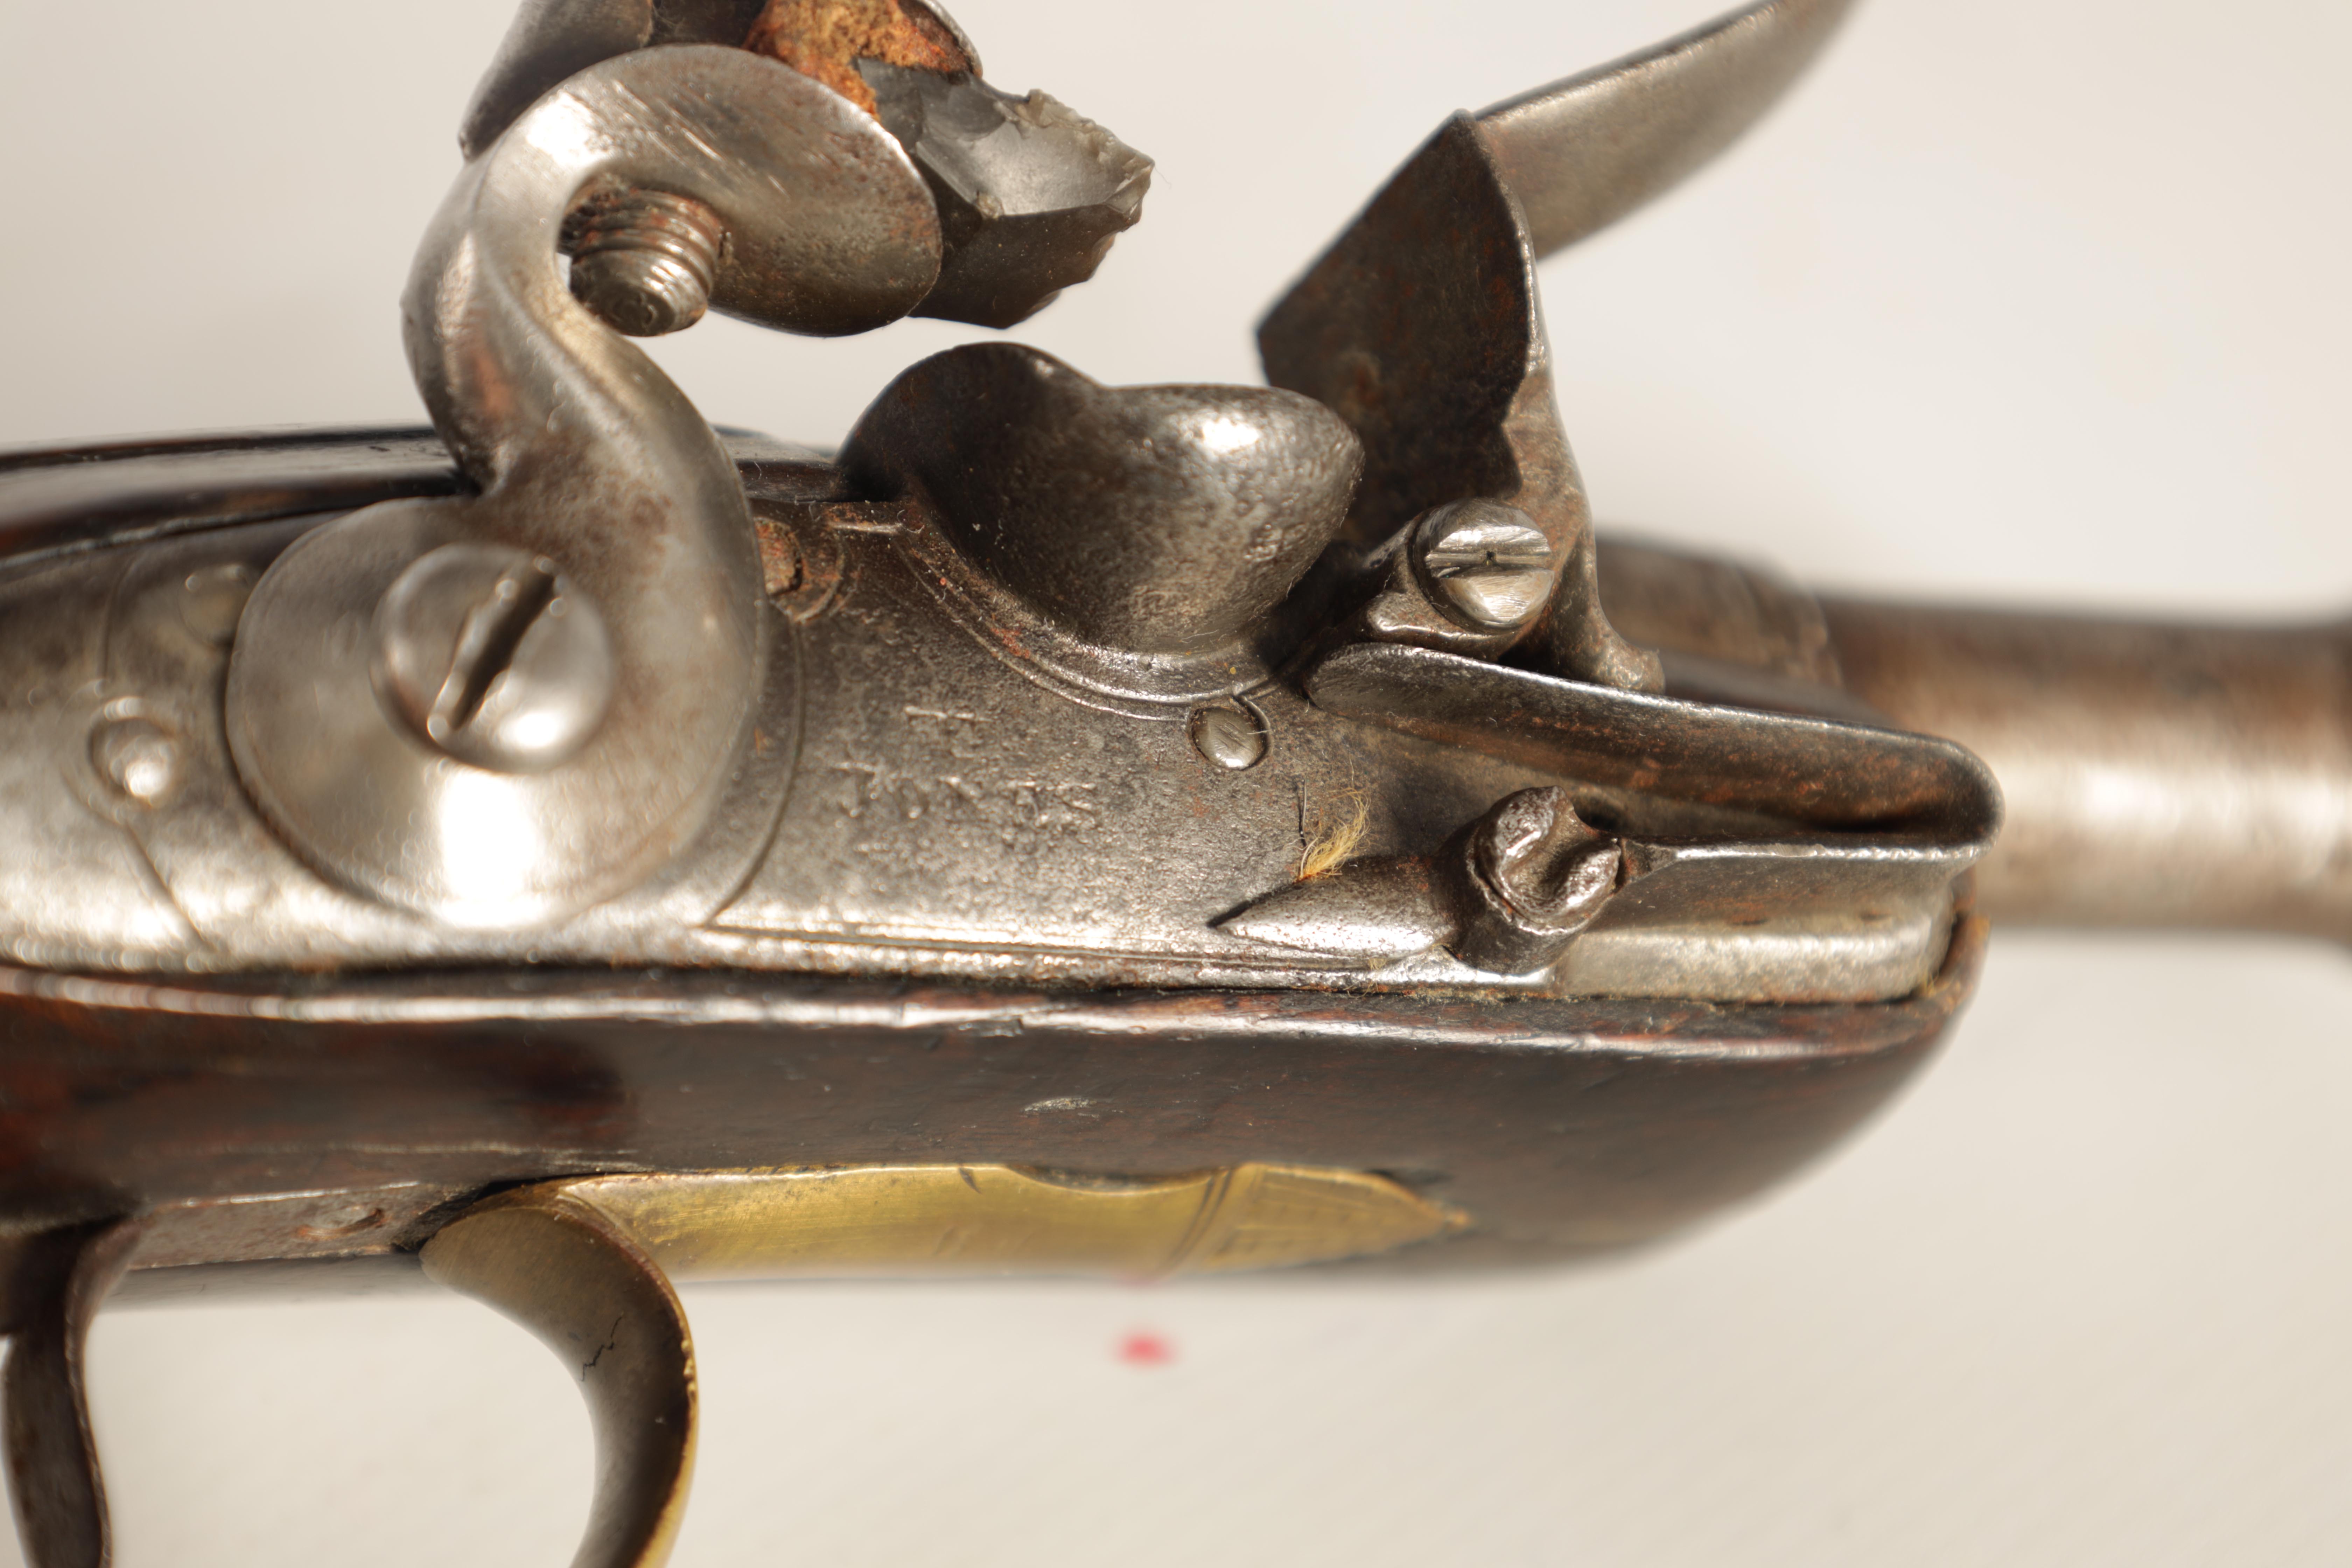 T. JONES. A PAIR OF EARLY 18TH CENTURY FLINTLOCK POCKET PISTOLS with turn-off cannon barrel, - Image 13 of 14